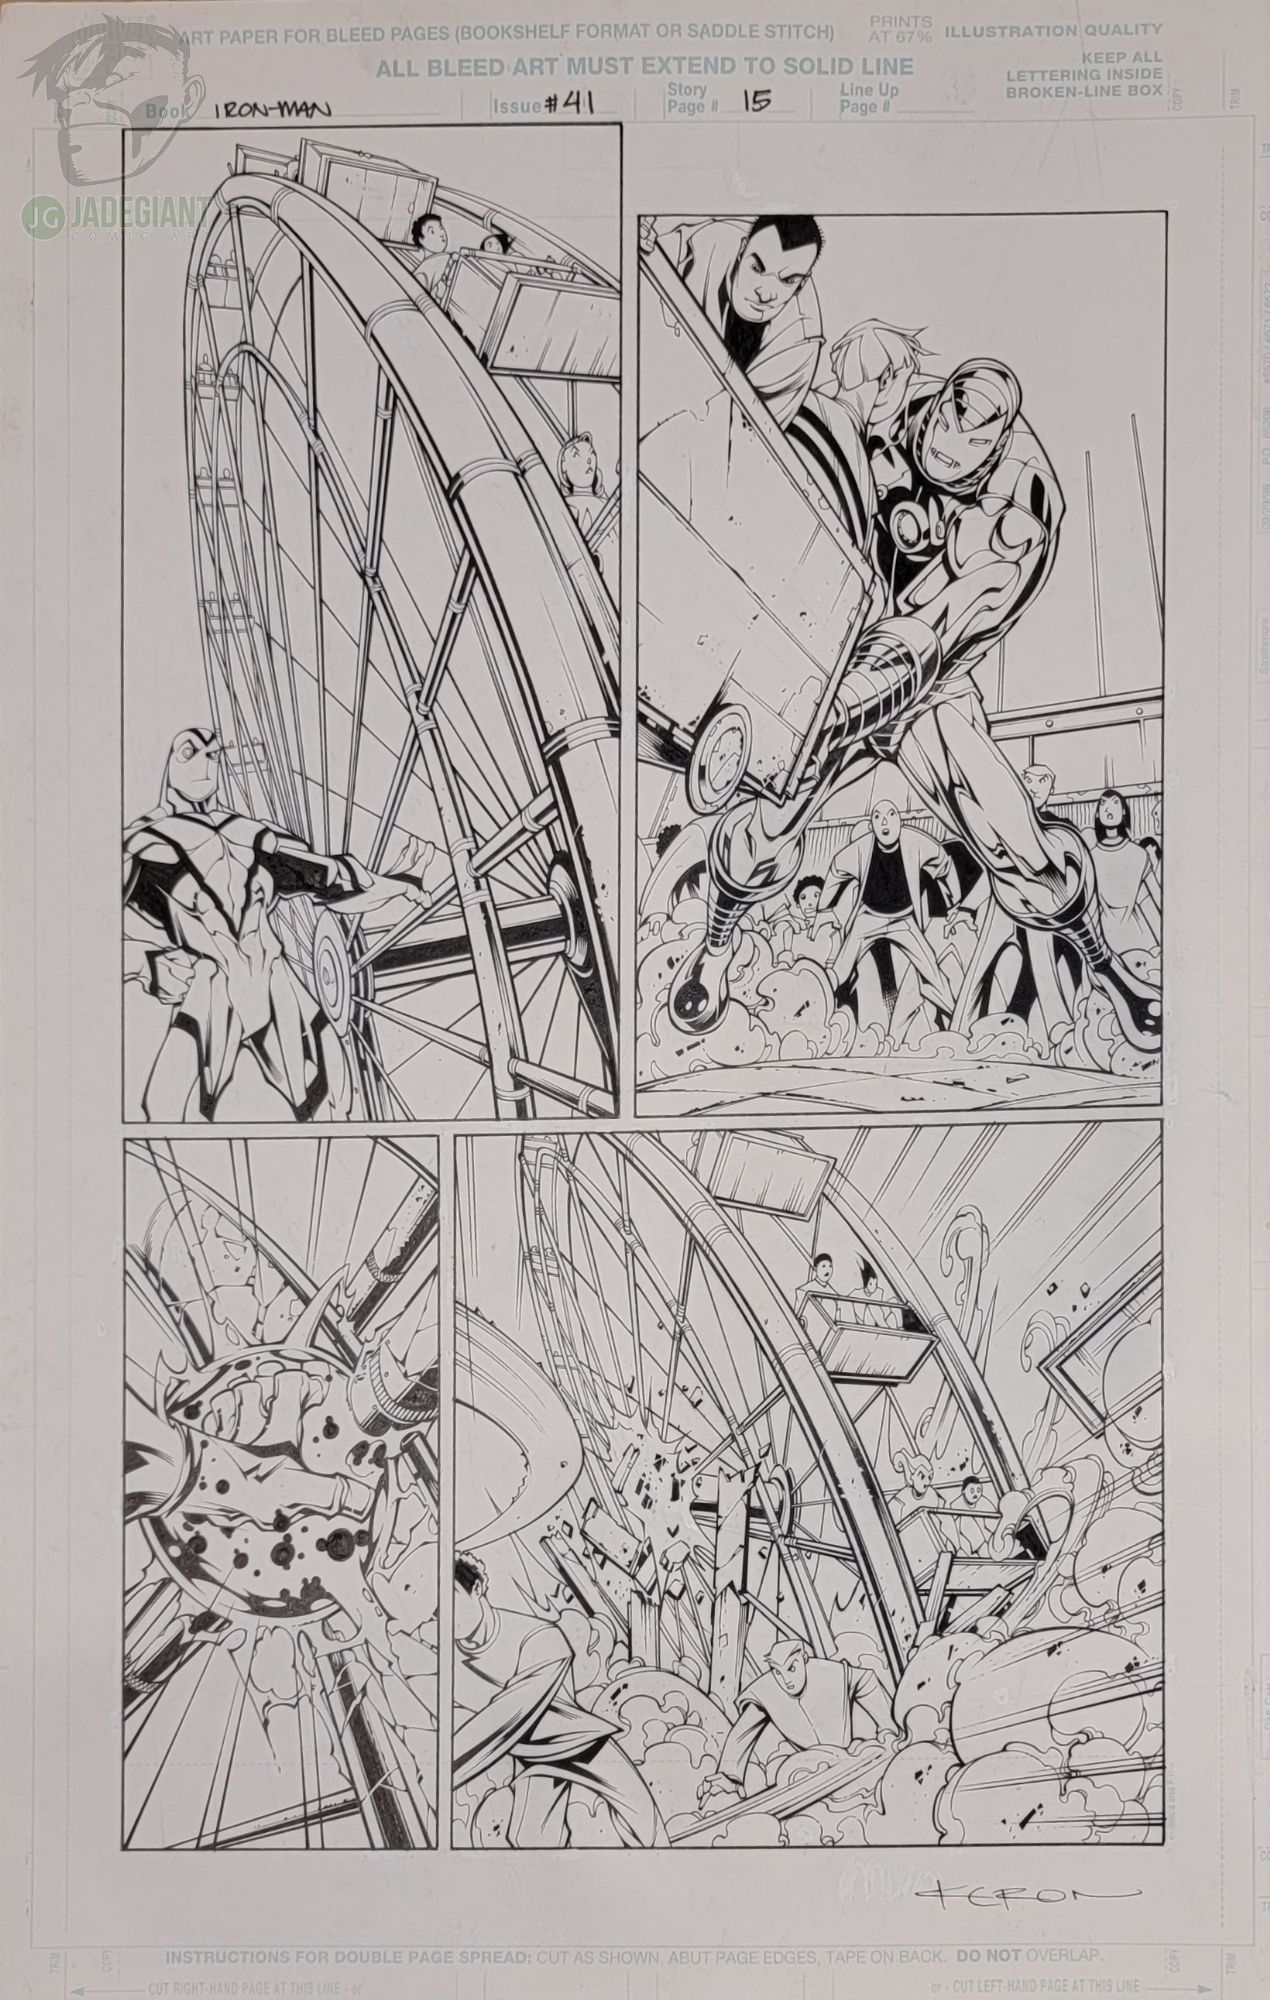 2001 Iron Man vol 3 issue 41 page 15 by Keron Grant Comic Art